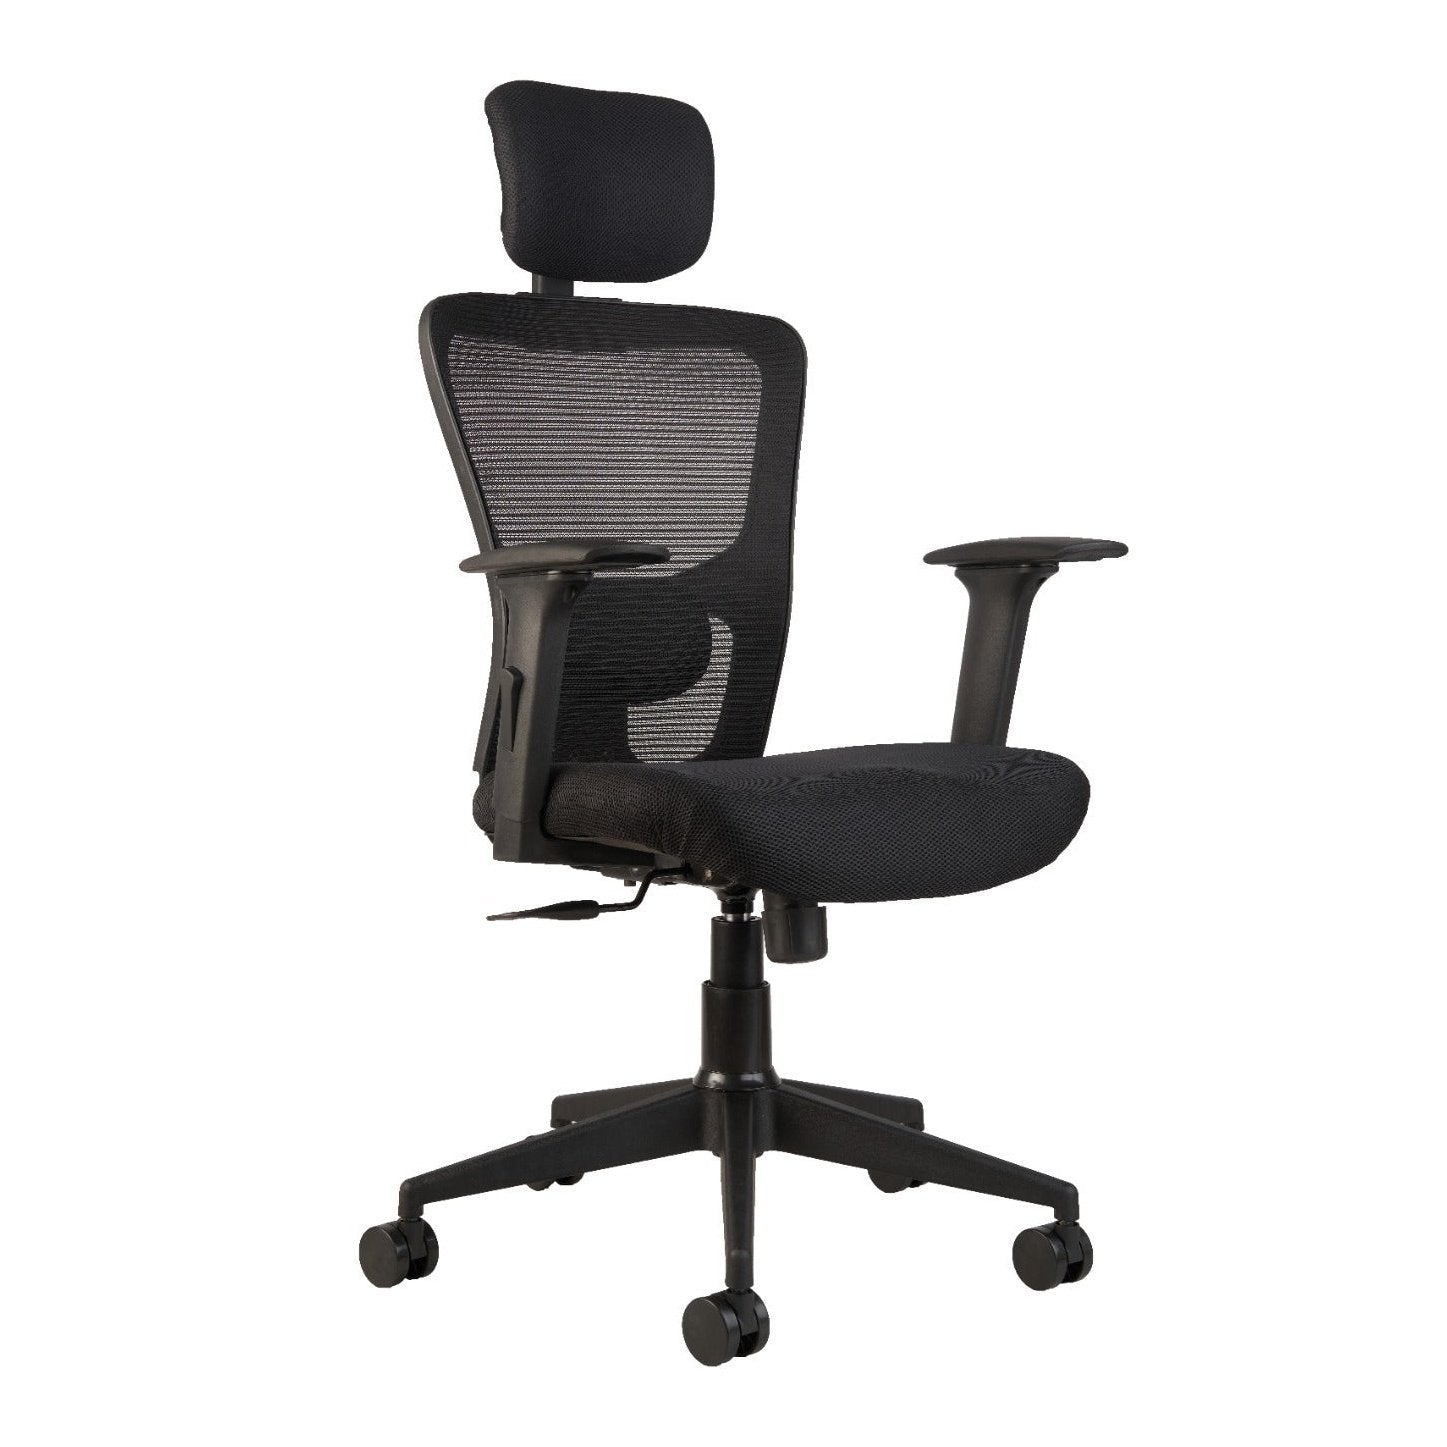 Leo C110 (JAZZ) Mesh Executive Office Chair CellBell